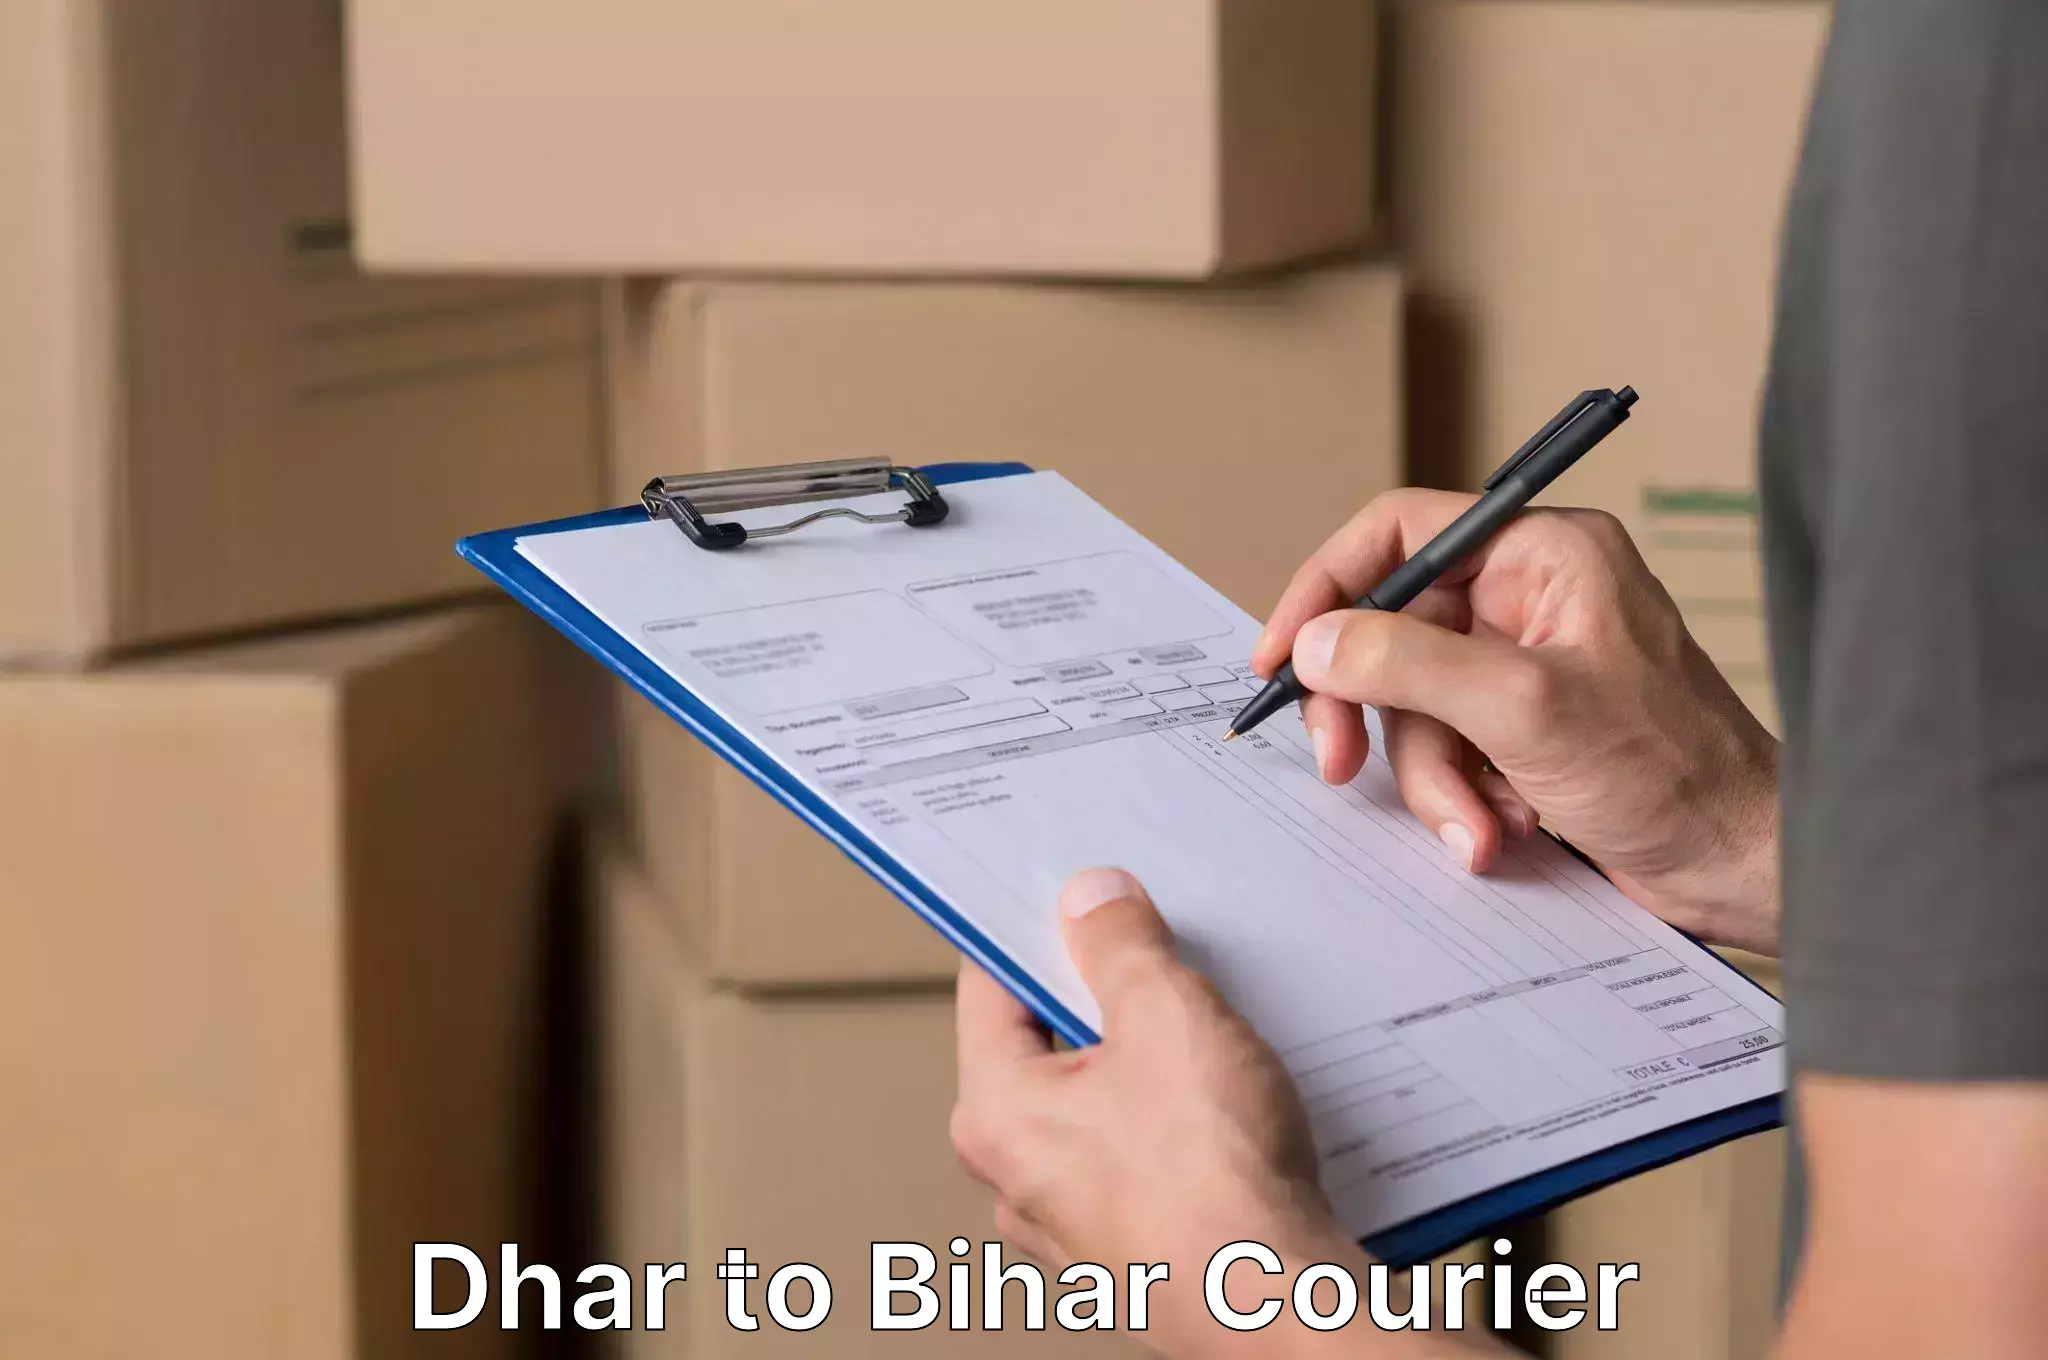 Full-service movers Dhar to Maheshkhunt